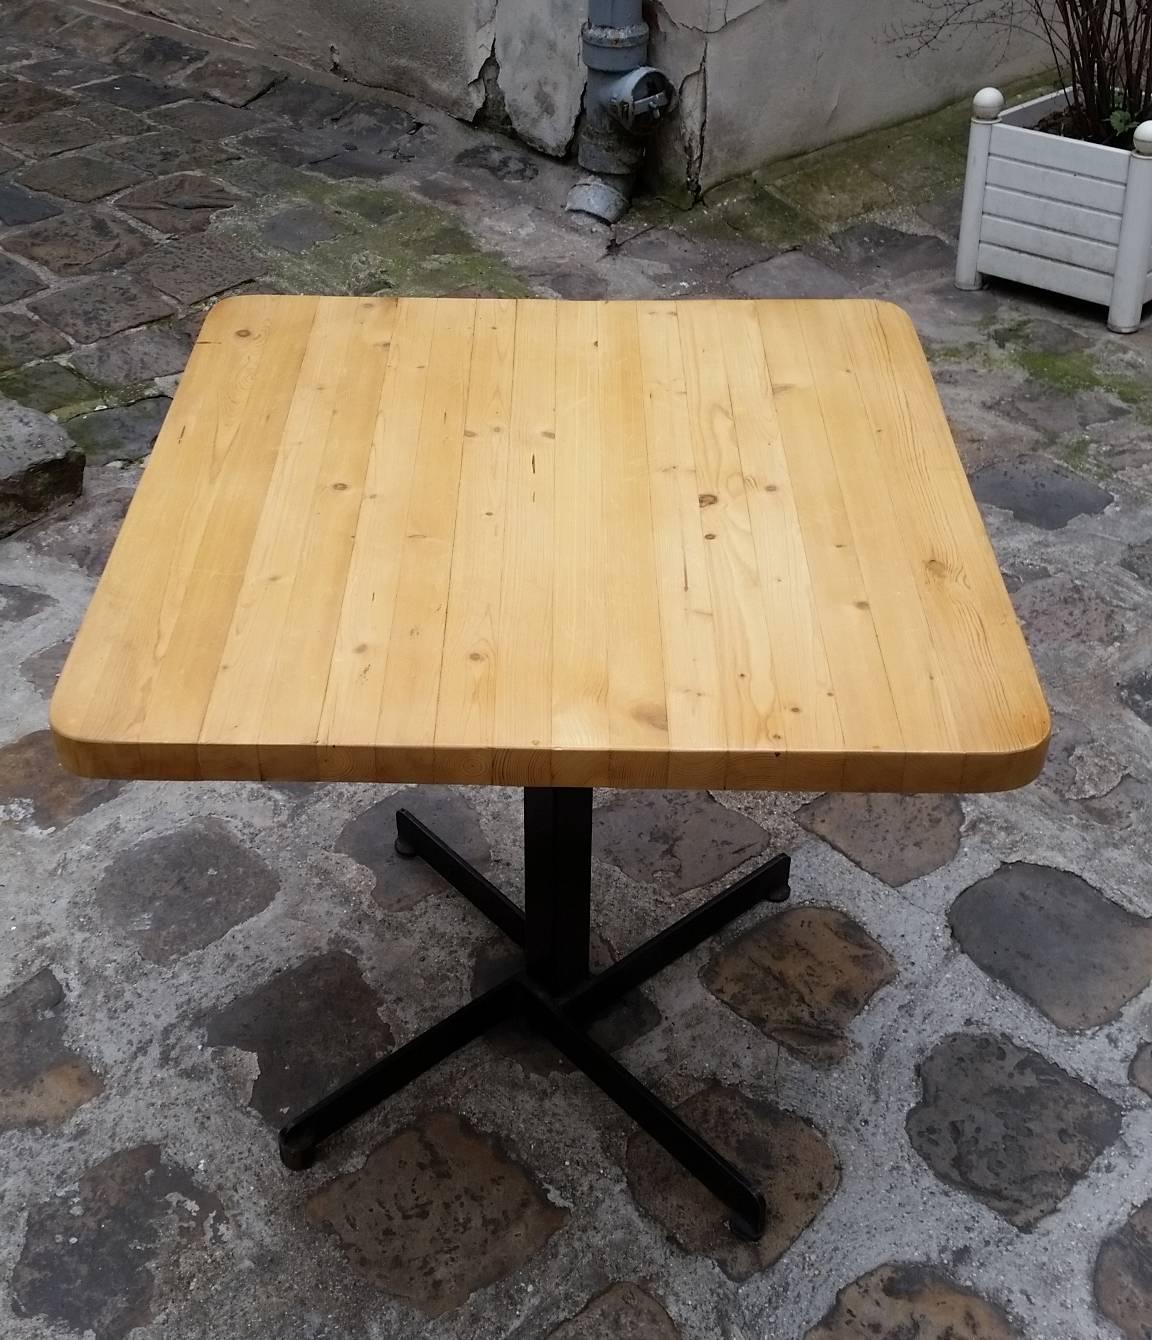 Charlotte Perriand
1960s
Square table
This small square table is in excellent condition. It consists of a pine wood top and a black lacquered metal base.

Measures: 70 x 70 H 67 cm
Table top in pine wood, metal base.
Les Arcs
Nice condition!